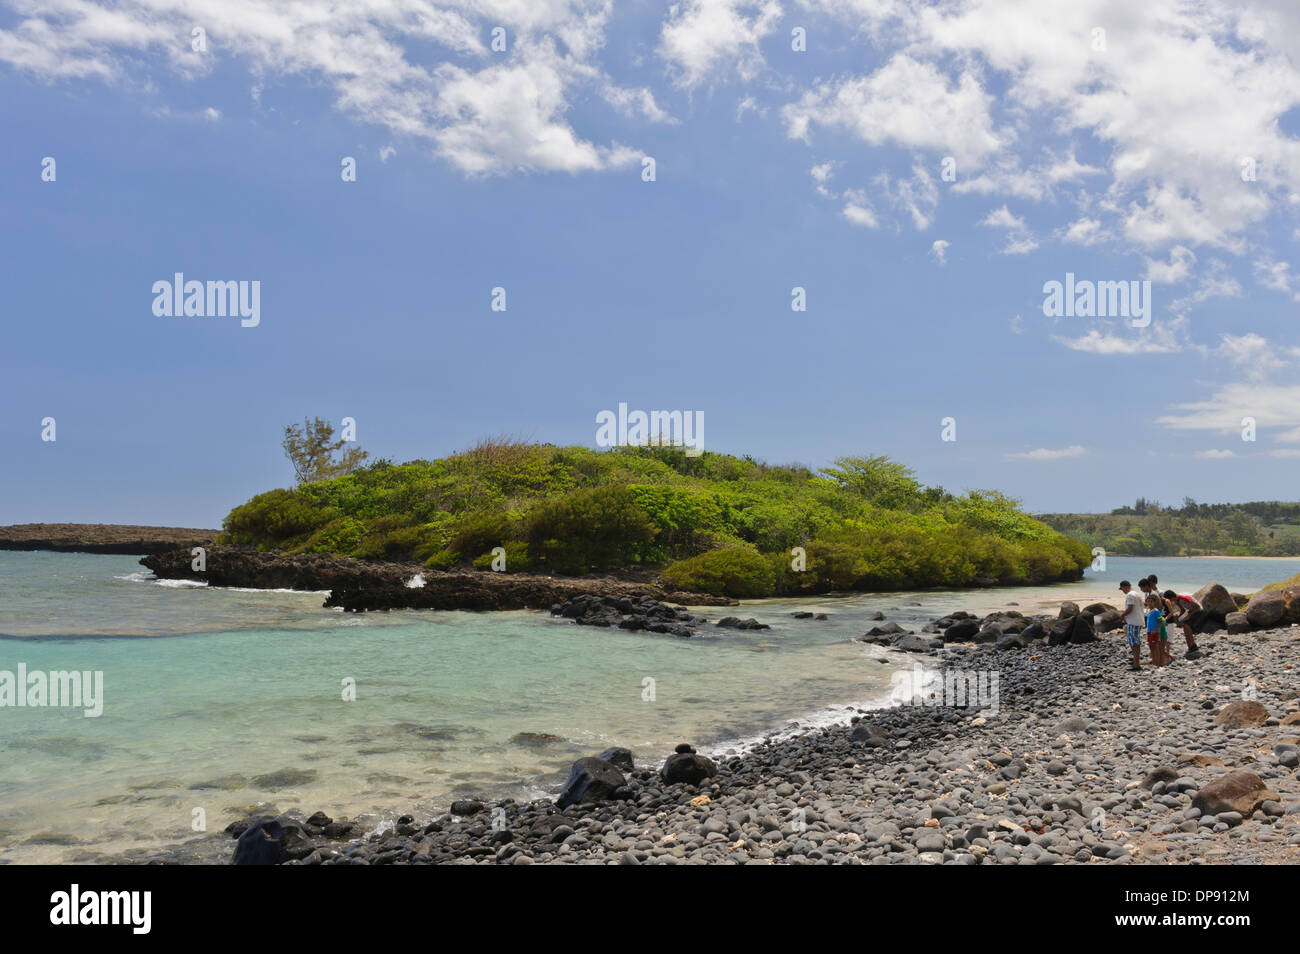 Pebbles of all sizes cover the beach by Iles ilot Sancho, a small deserted island in  the savannah district, Mauritius. Stock Photo